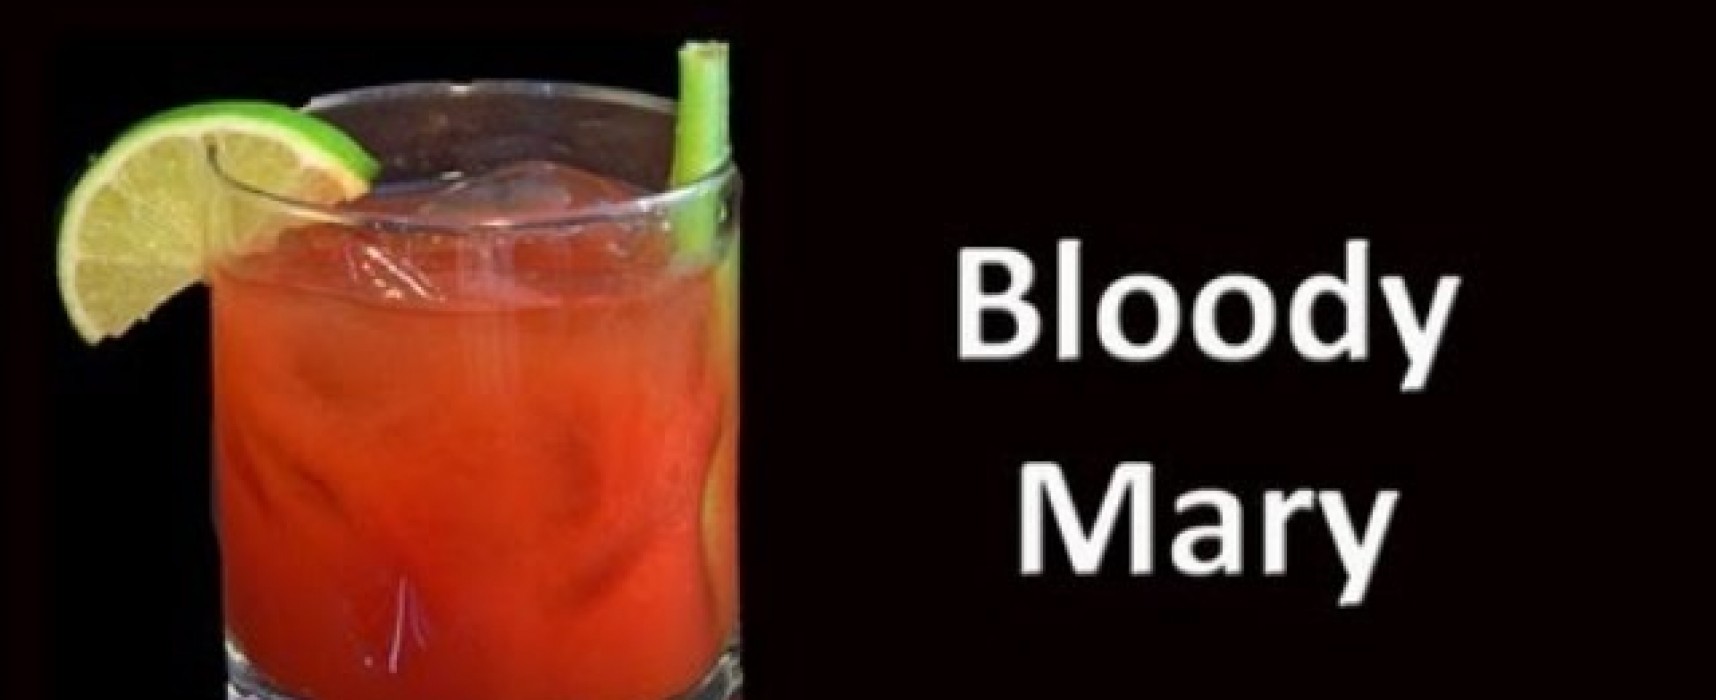 Bloody Mary: One of the Most Popular Cocktails